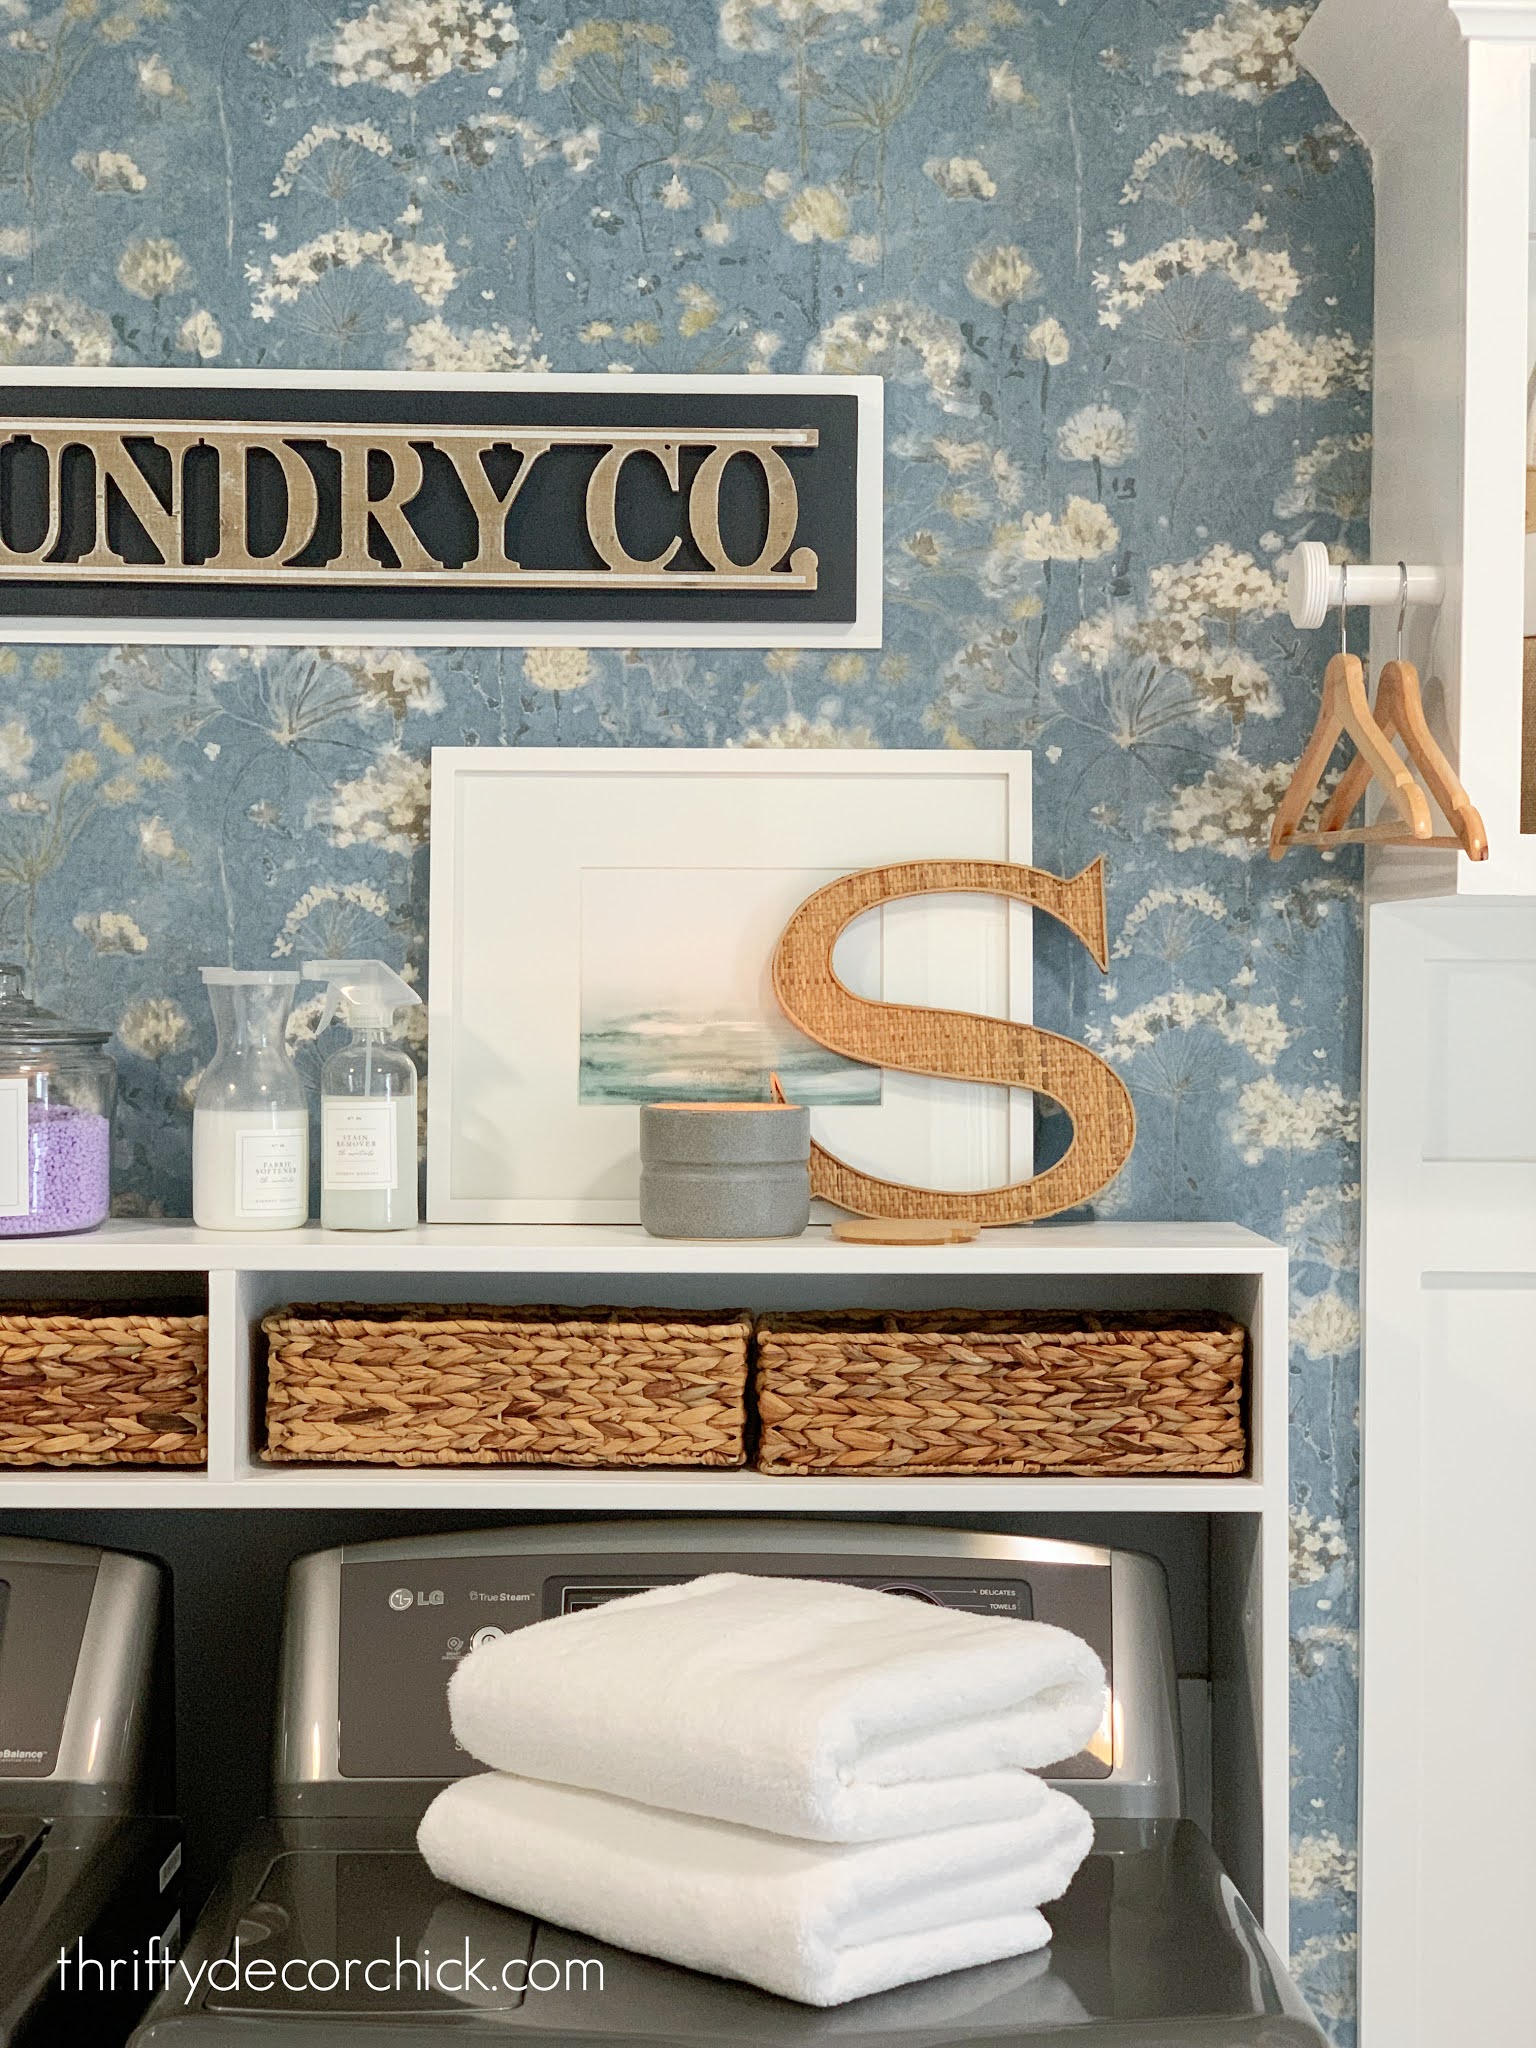 Our DIY laundry chute a year later, Thrifty Decor Chick